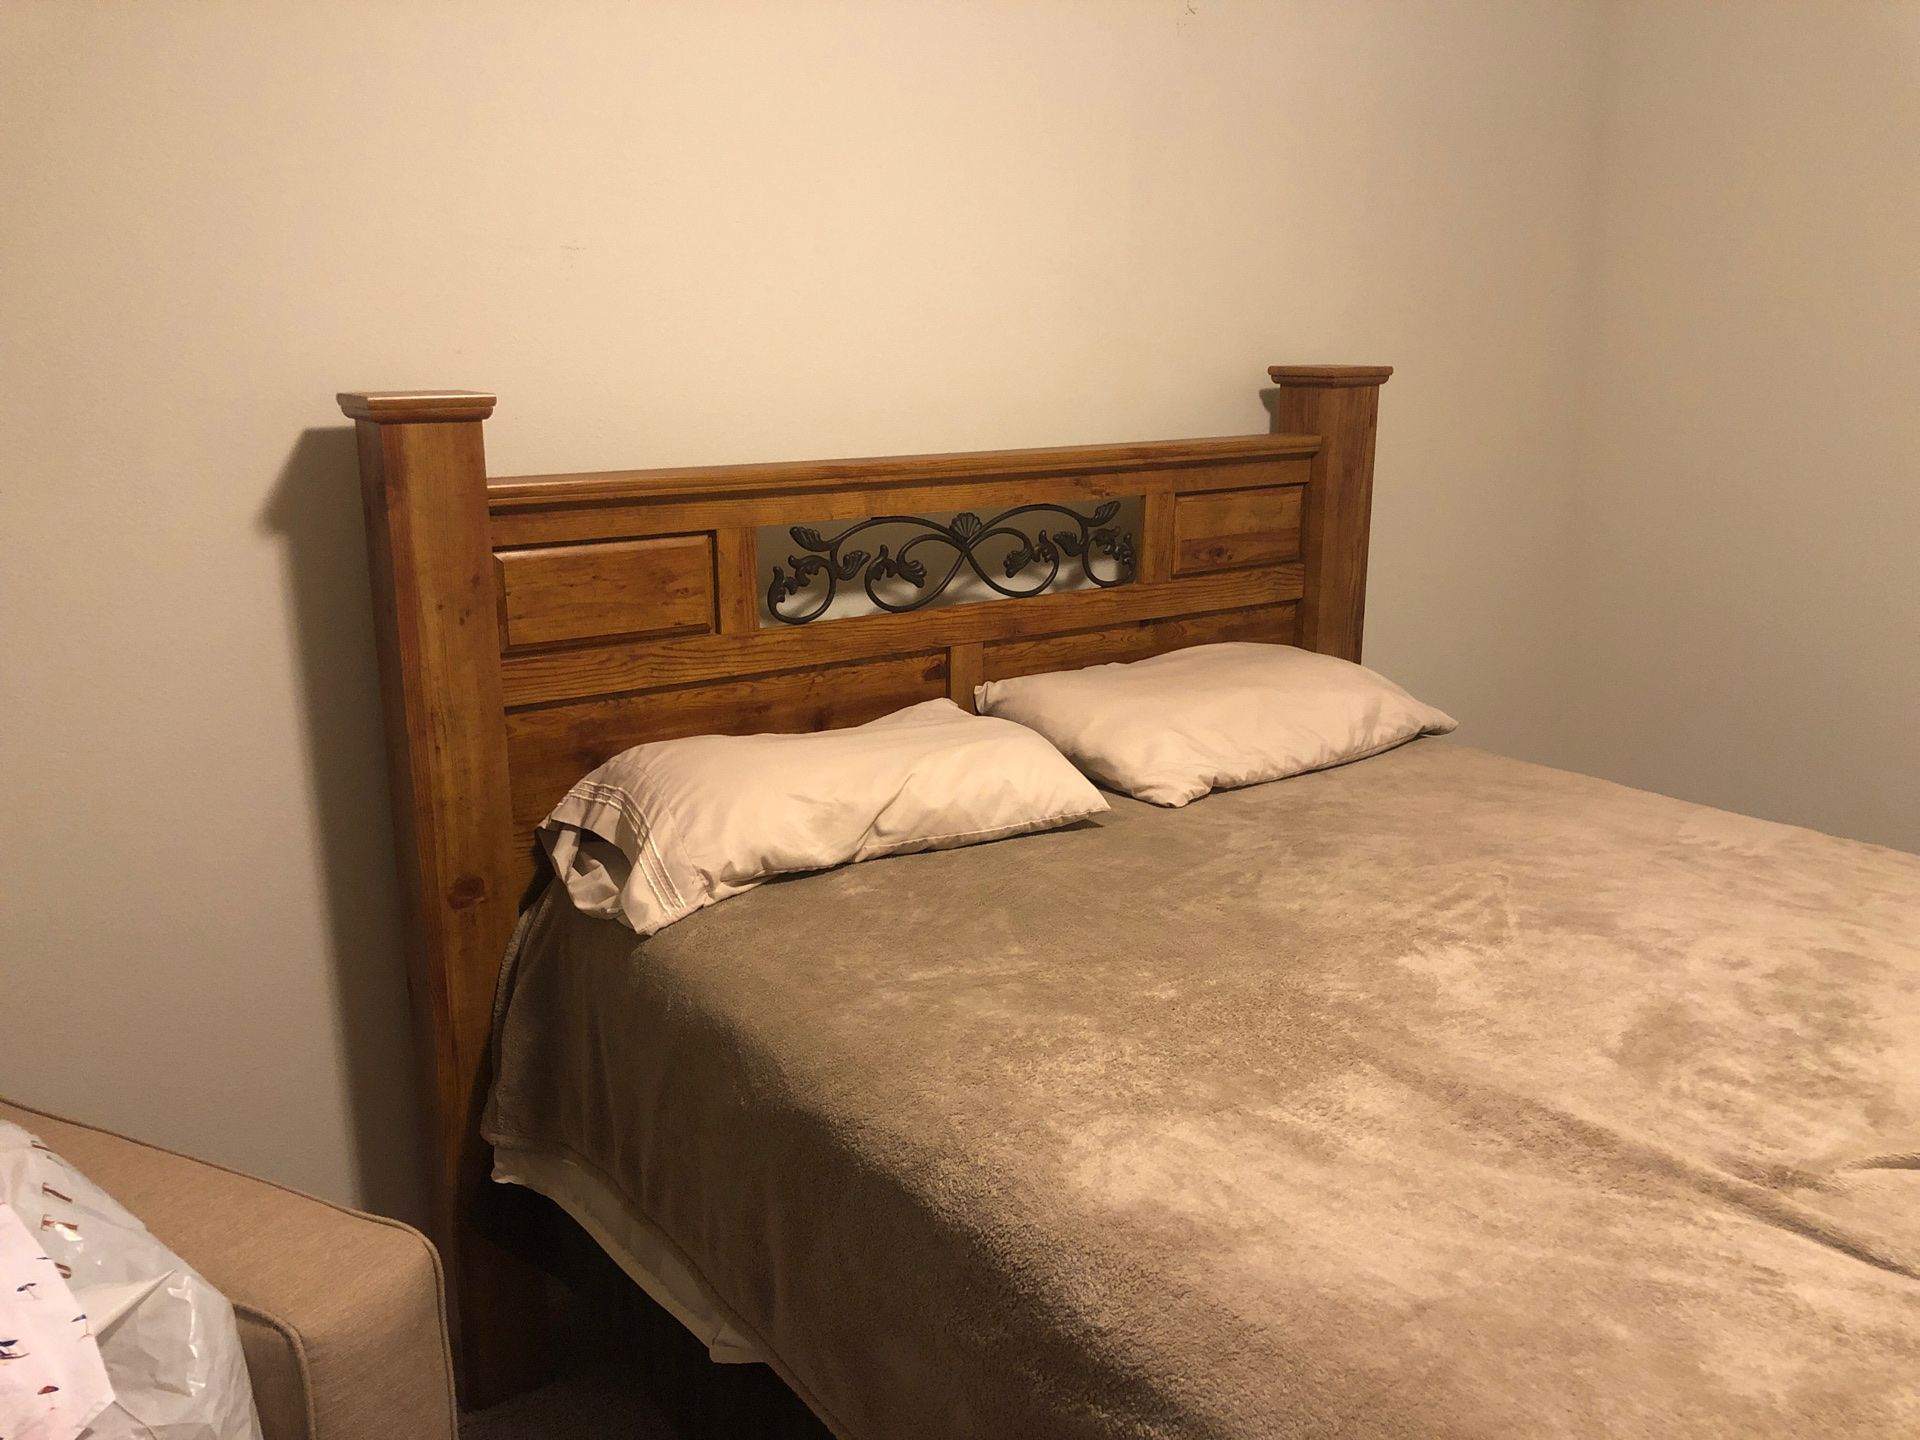 Queen sized bedroom furniture (mattress and box spring not included).